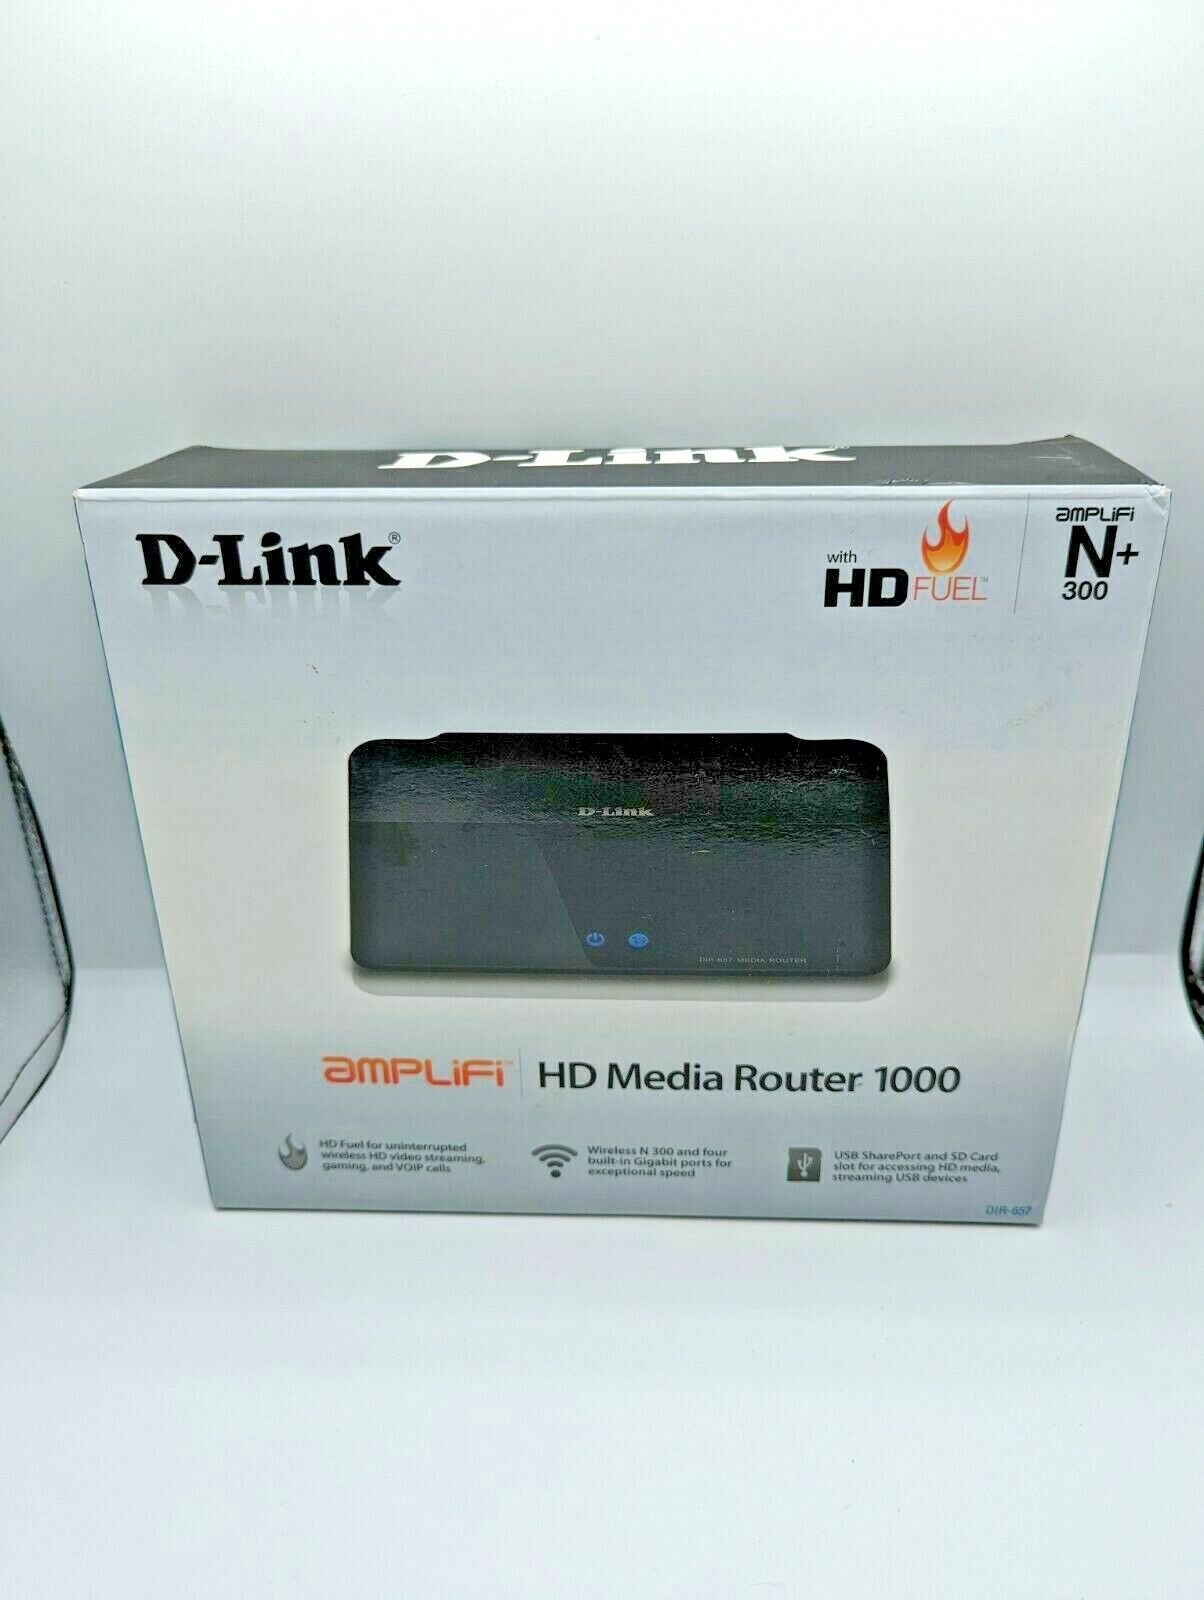 D-Link Systems HD Media Router 1000 w/ 4GB Ethernet Ports, SD Card Slot & USB 